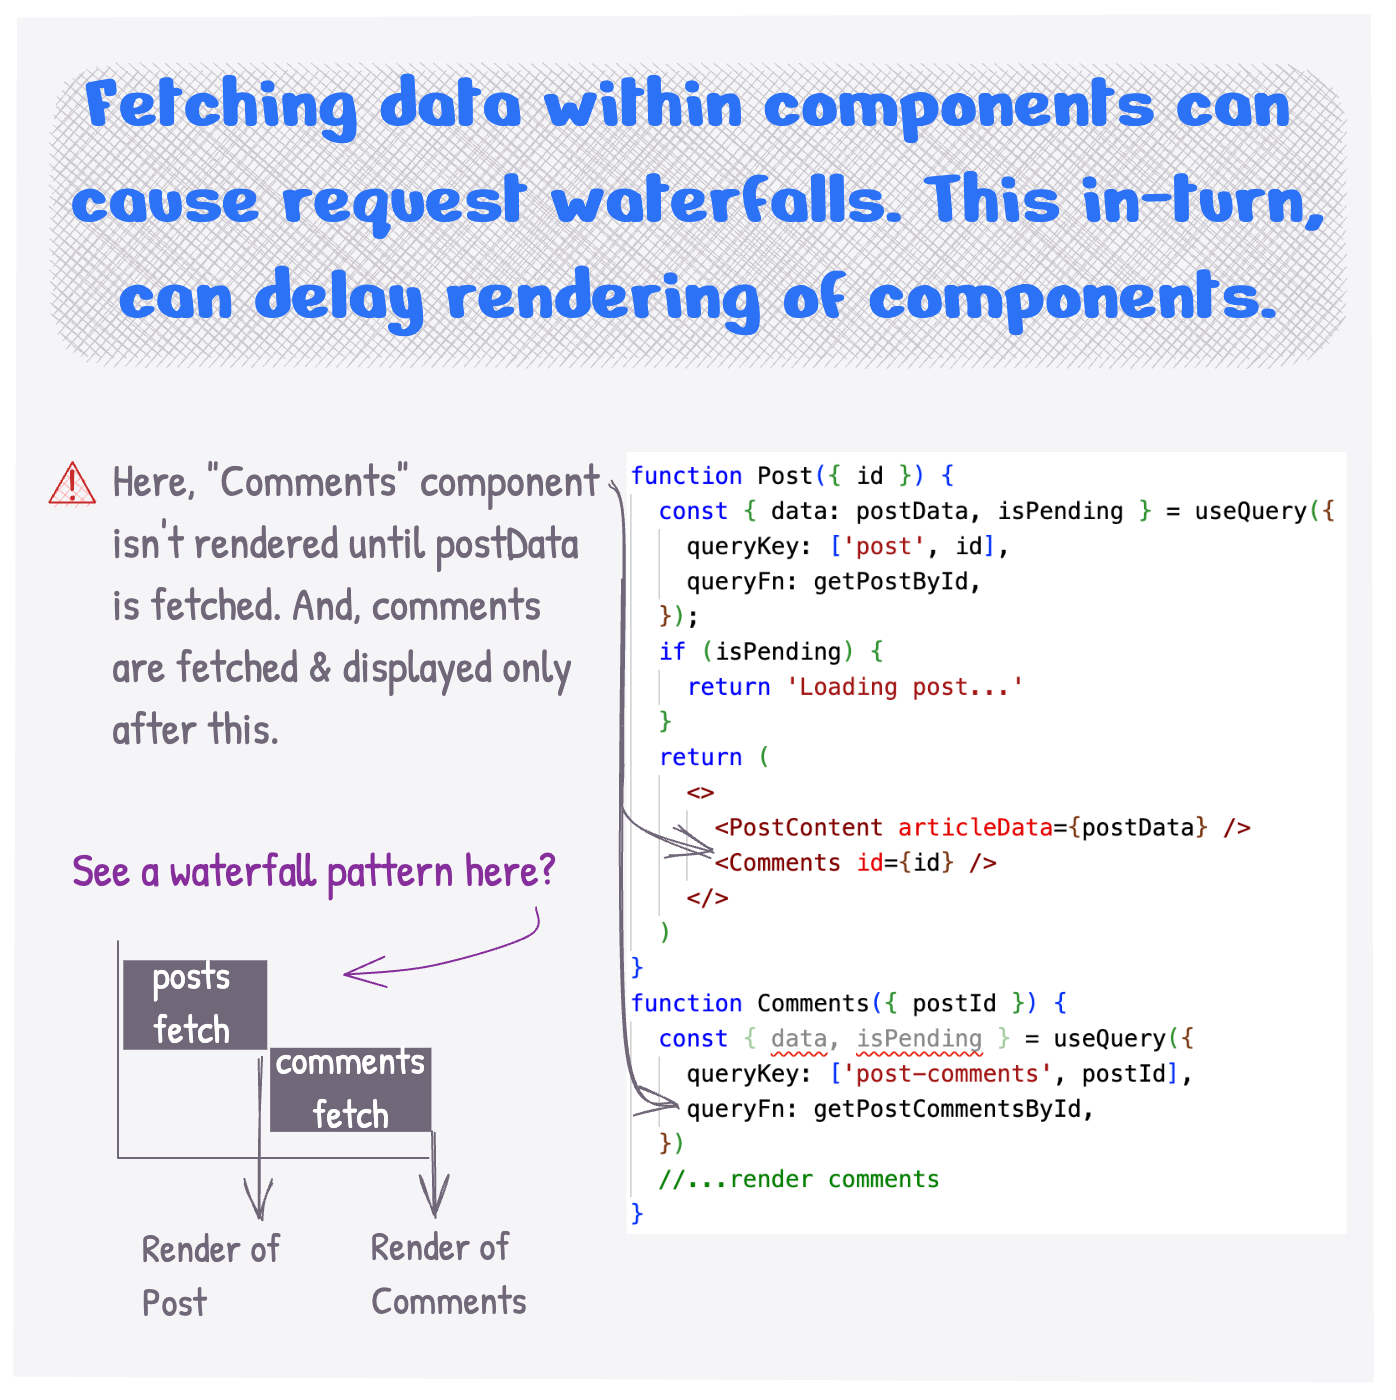 Fetching data within components can cause request waterfalls. This, in-turn, can delay rendering of components.